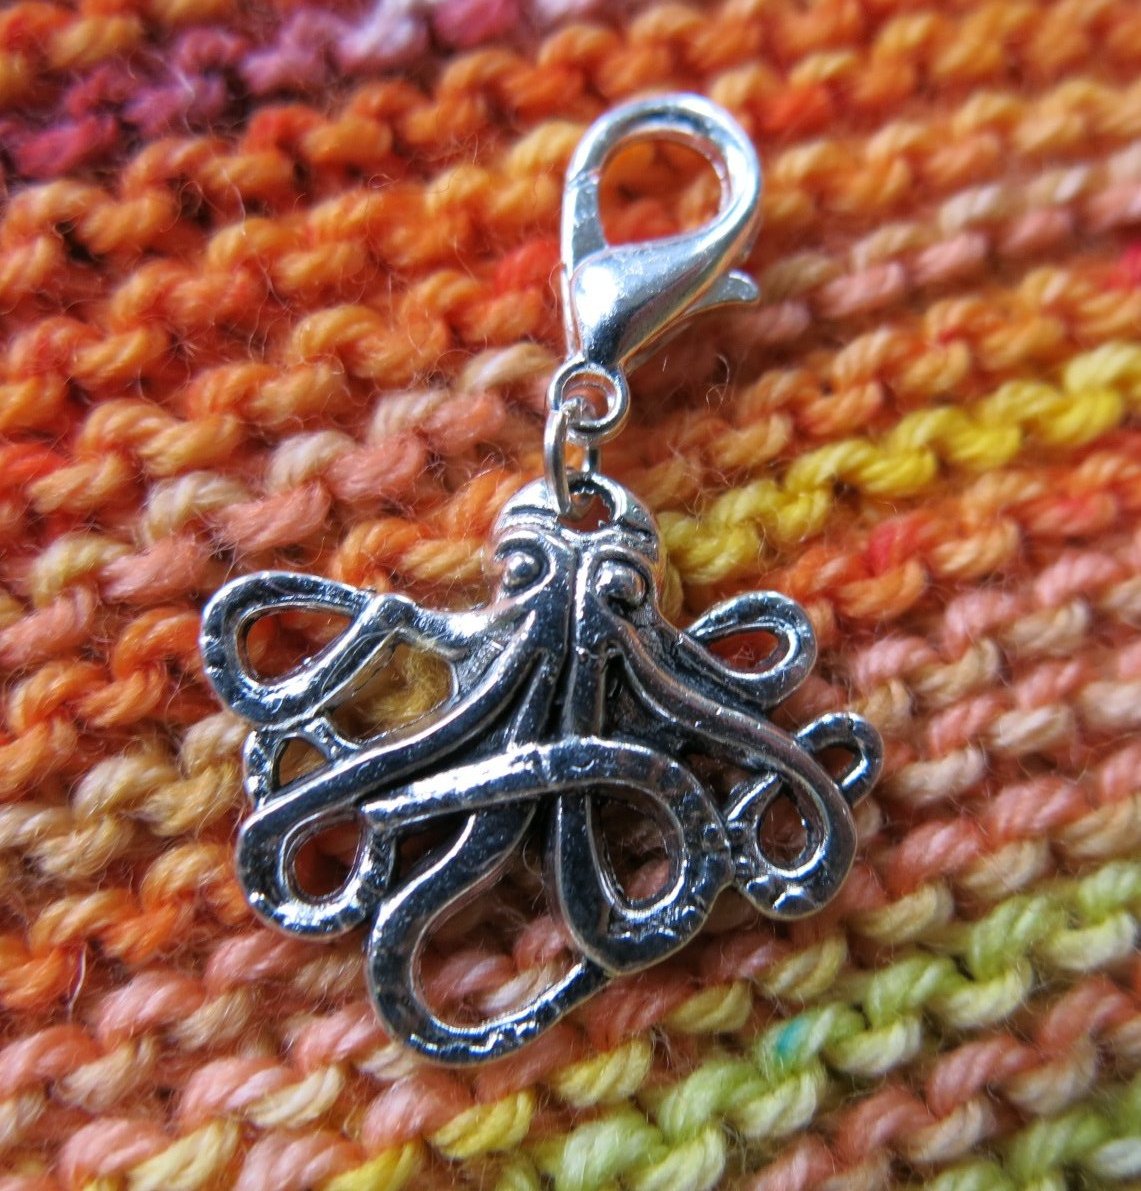 ooctopus charm on a lobster clasp for bracelets, crochet and knitting